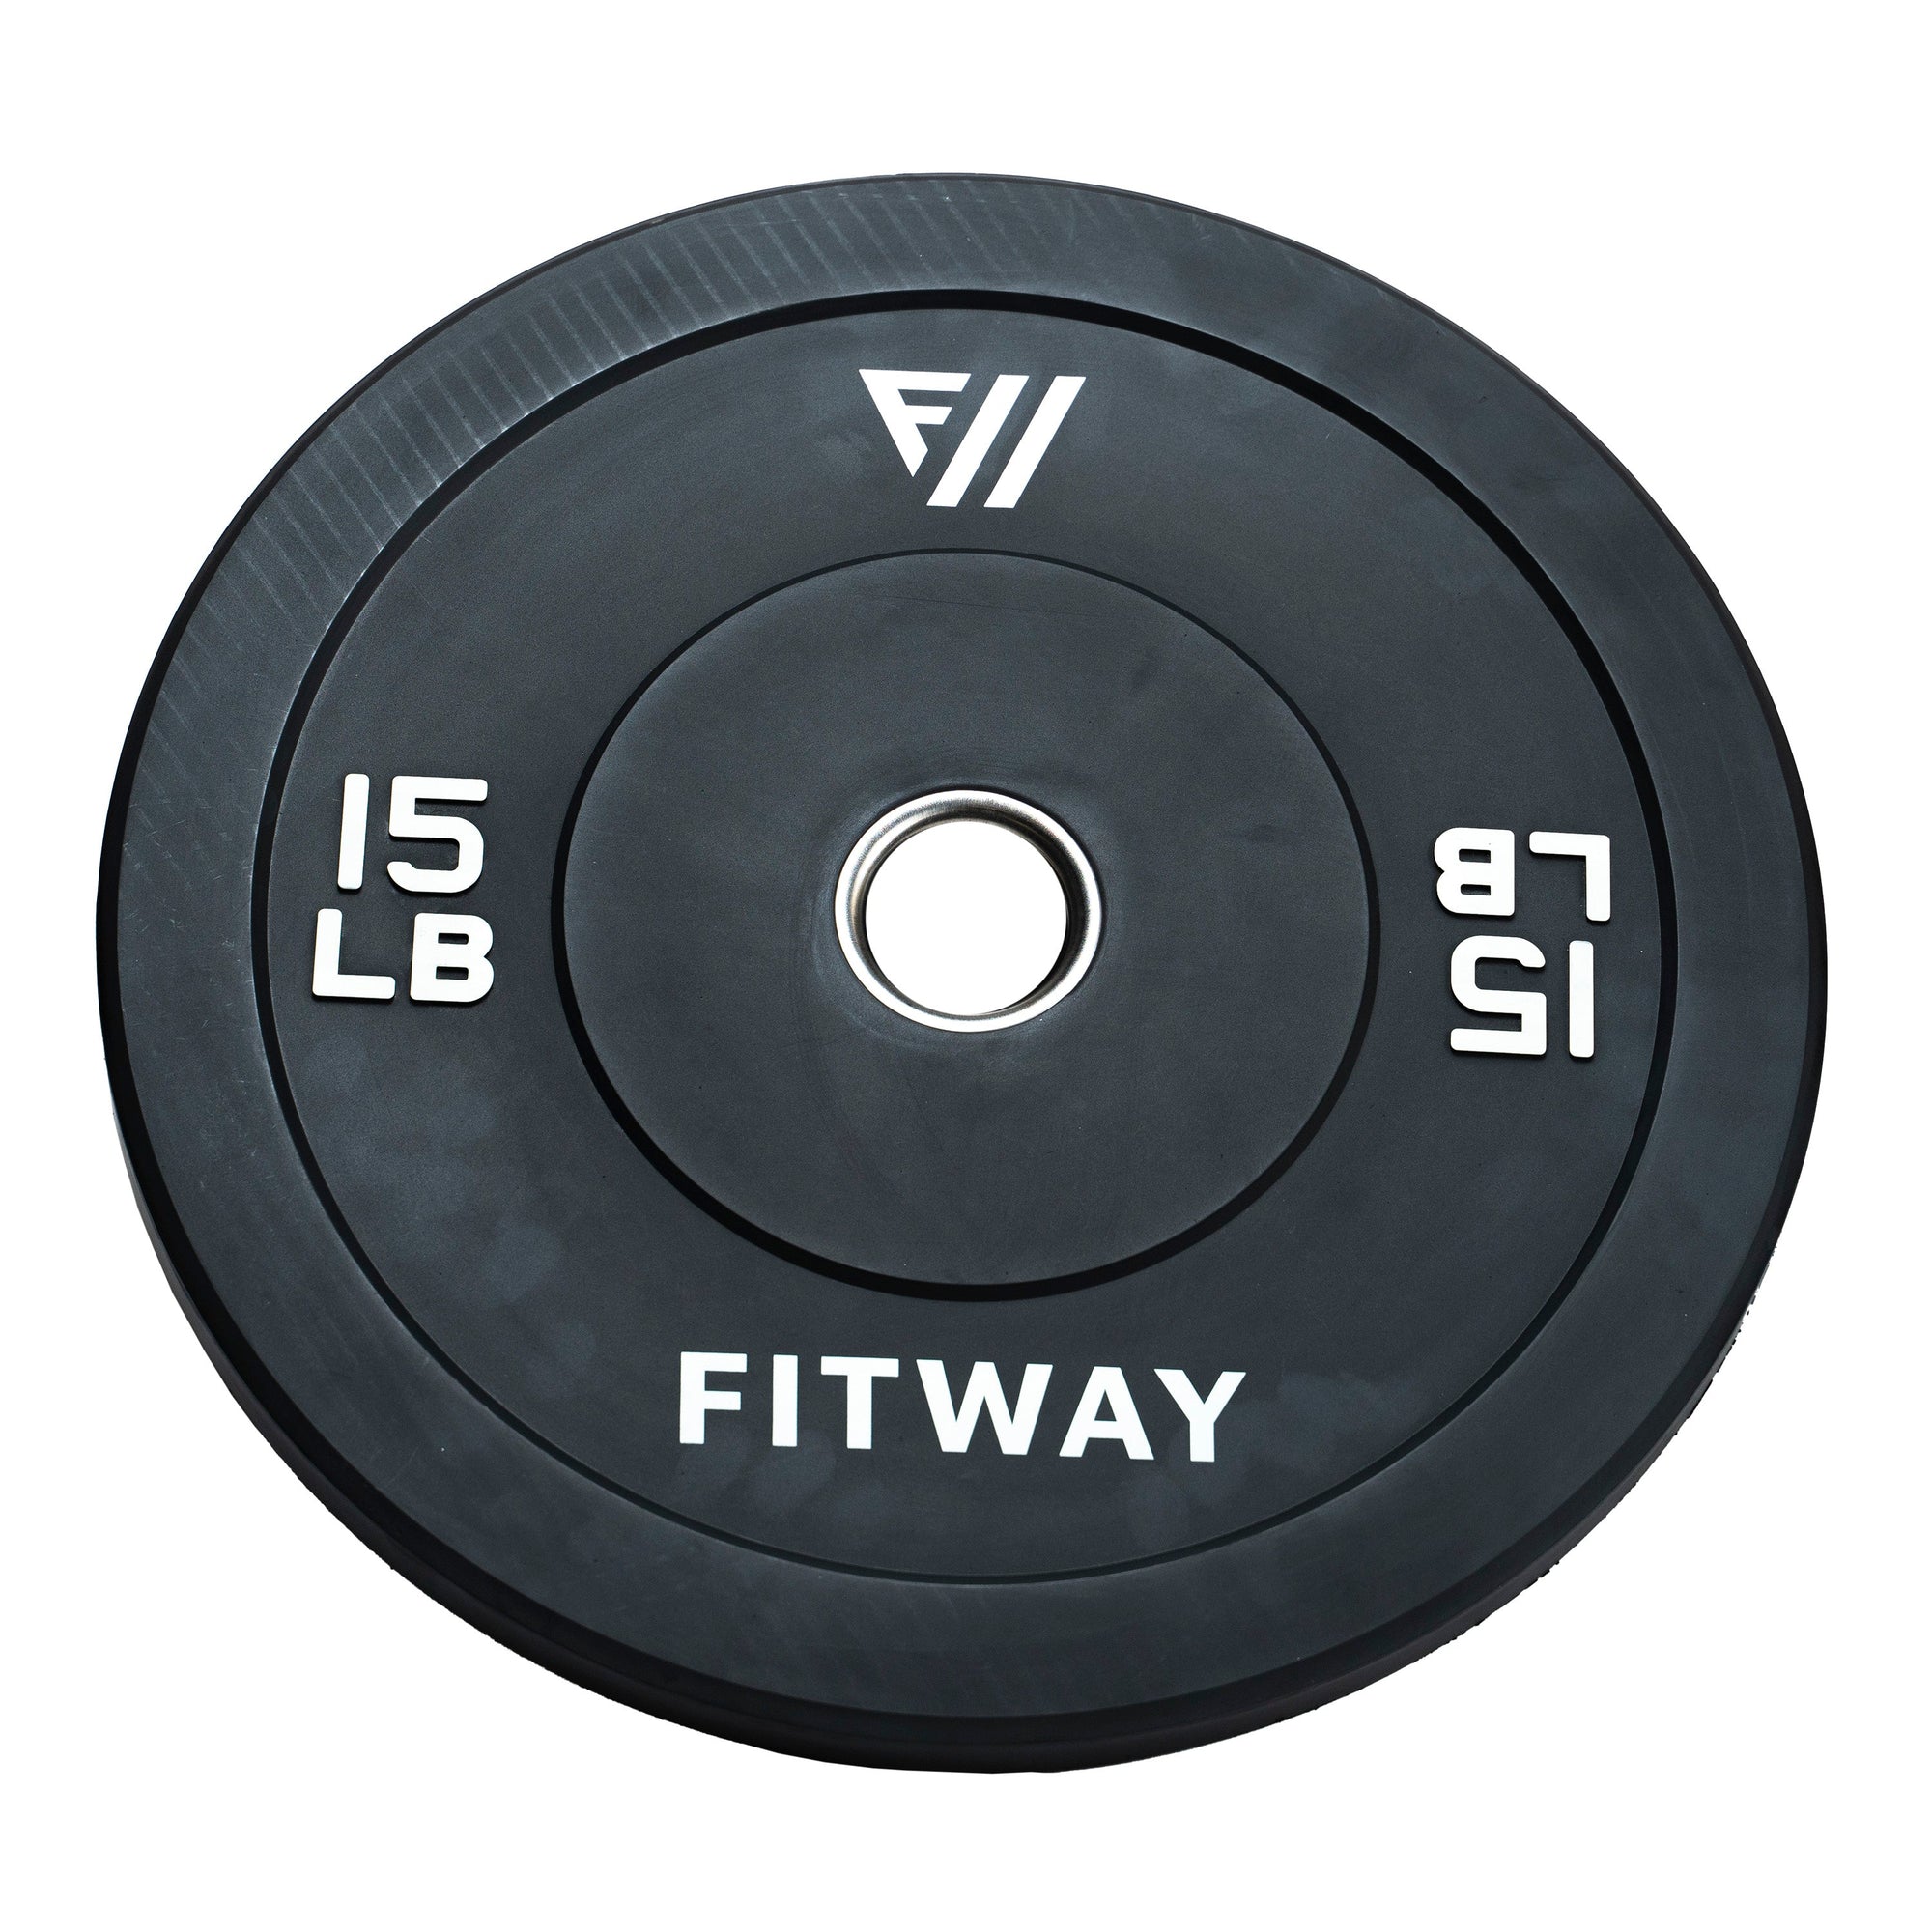 Fitway 15lb Olympic Rubber Bumper Plate 